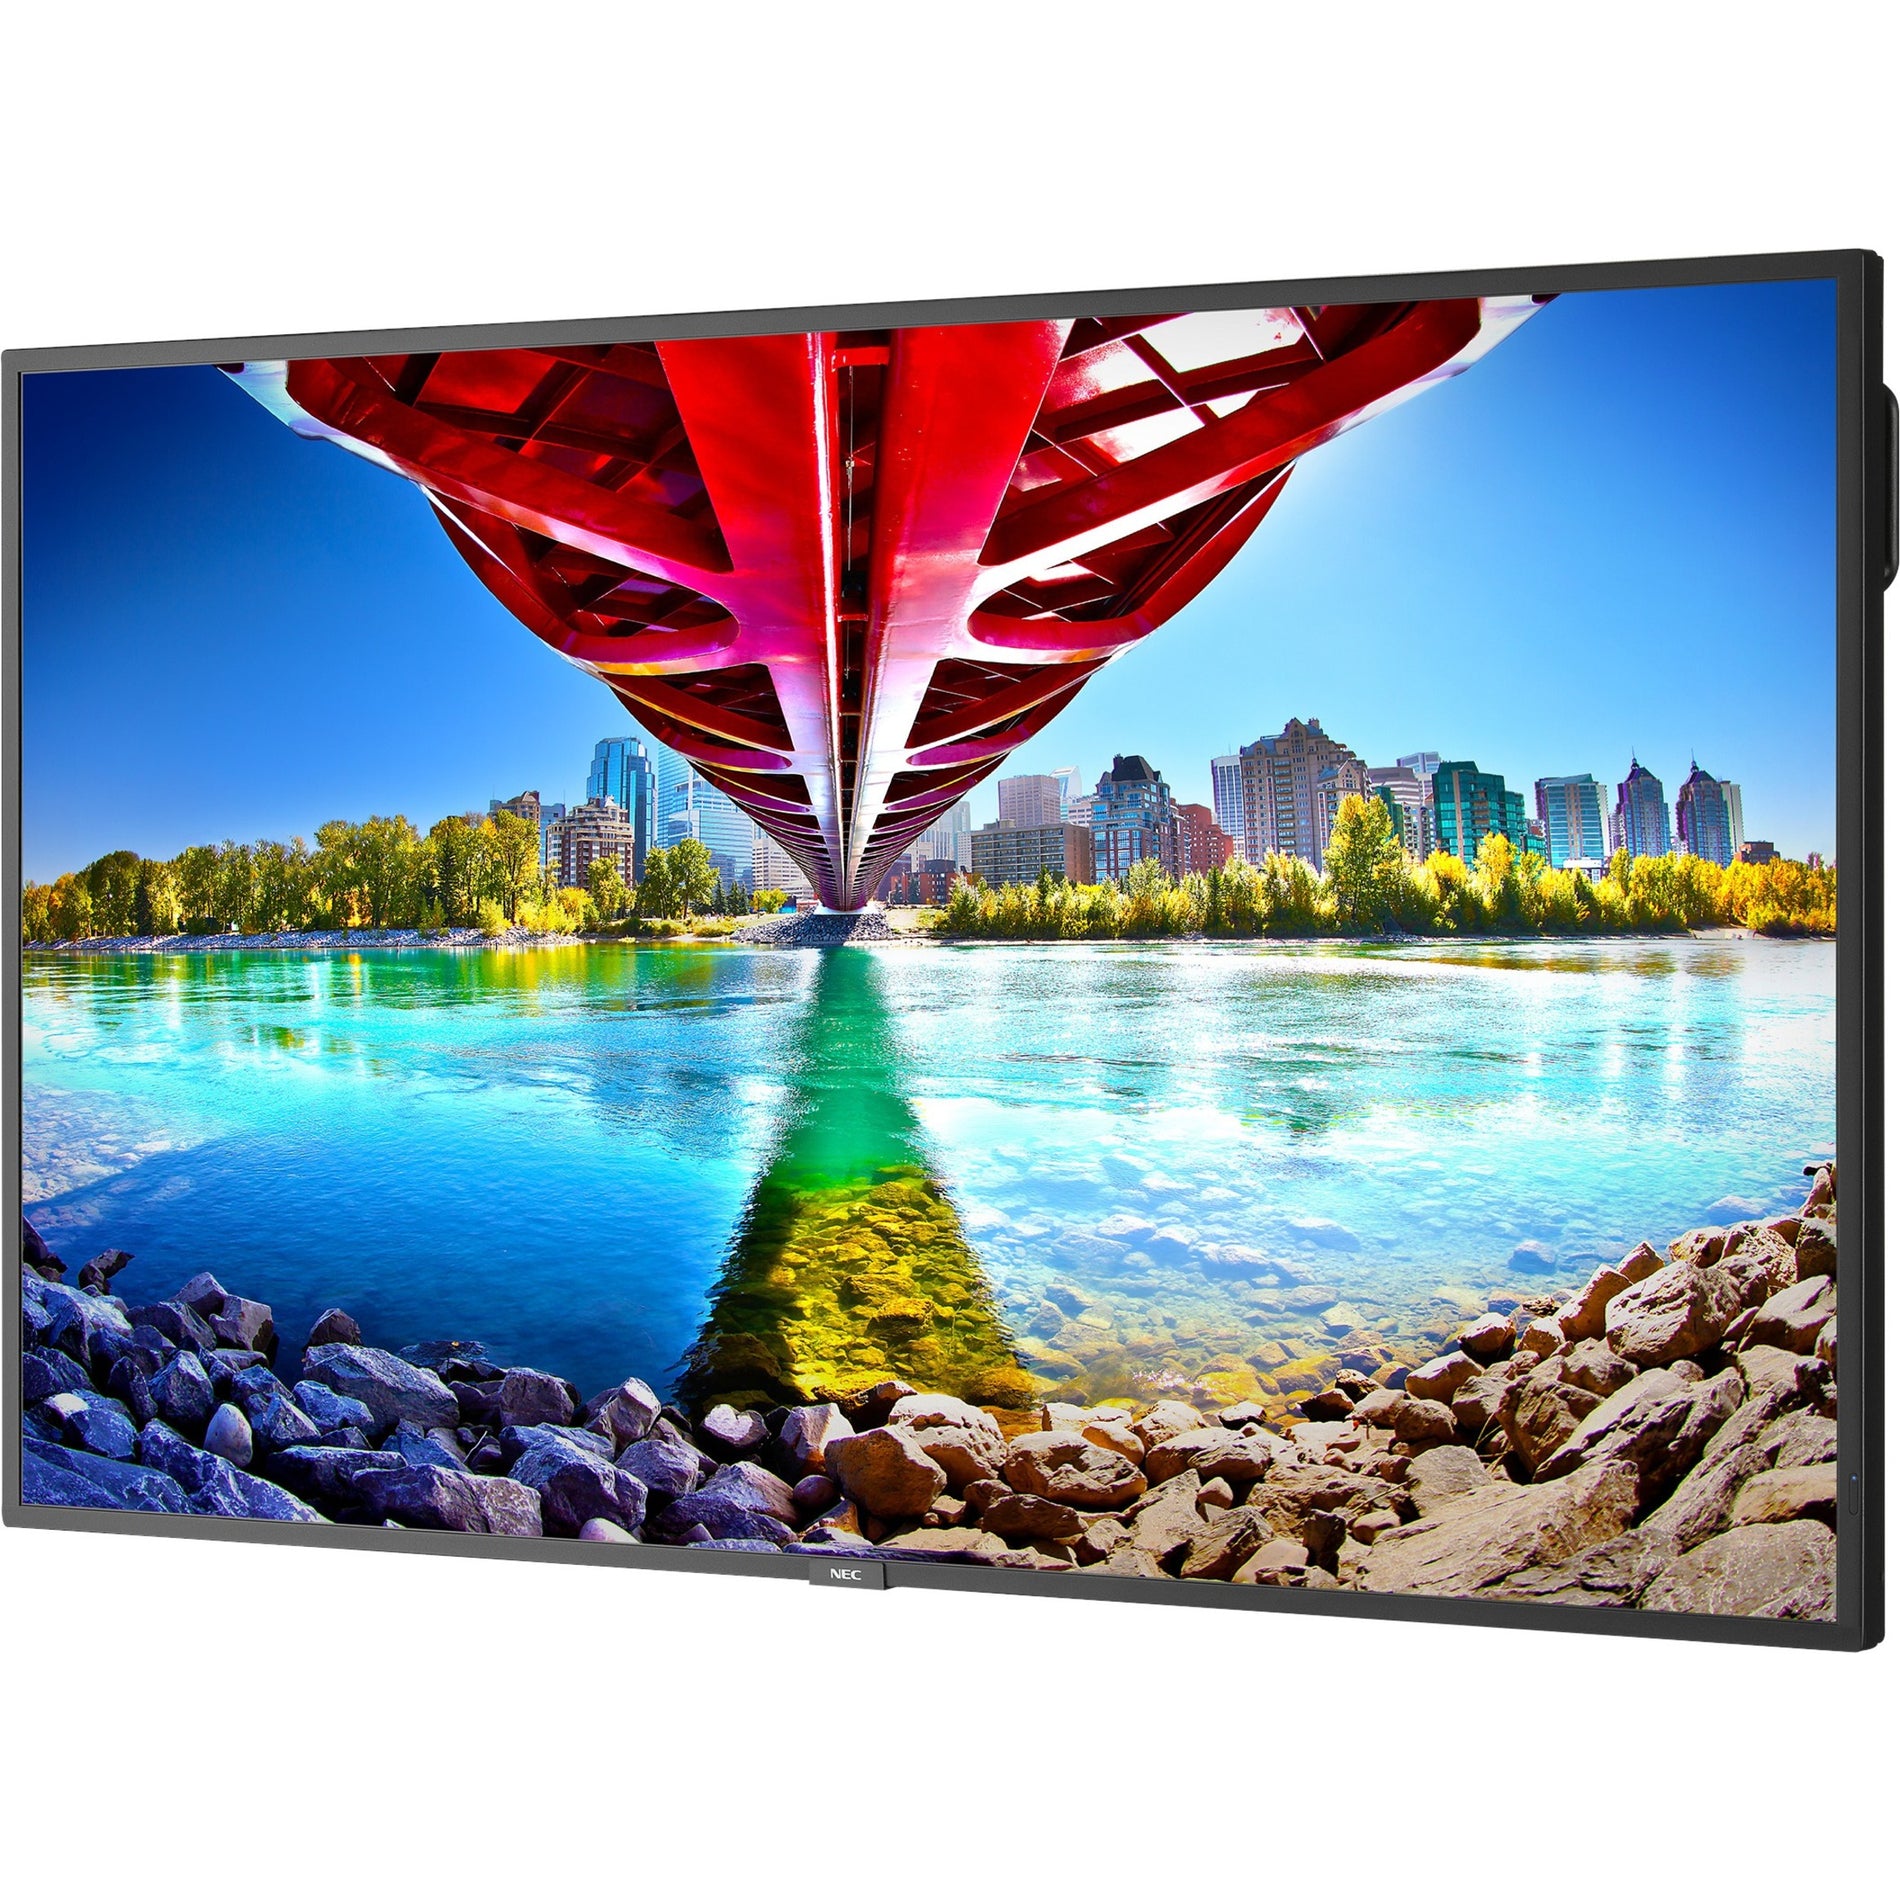 NEC Display ME551-PT 55" Ultra High Definition Commercial Display with PCAP Touch, 40-Point Touch, 2160p, 400 Nit, 8-bit+FRC, HDR10, HLG, PQ, 3 Year Warranty